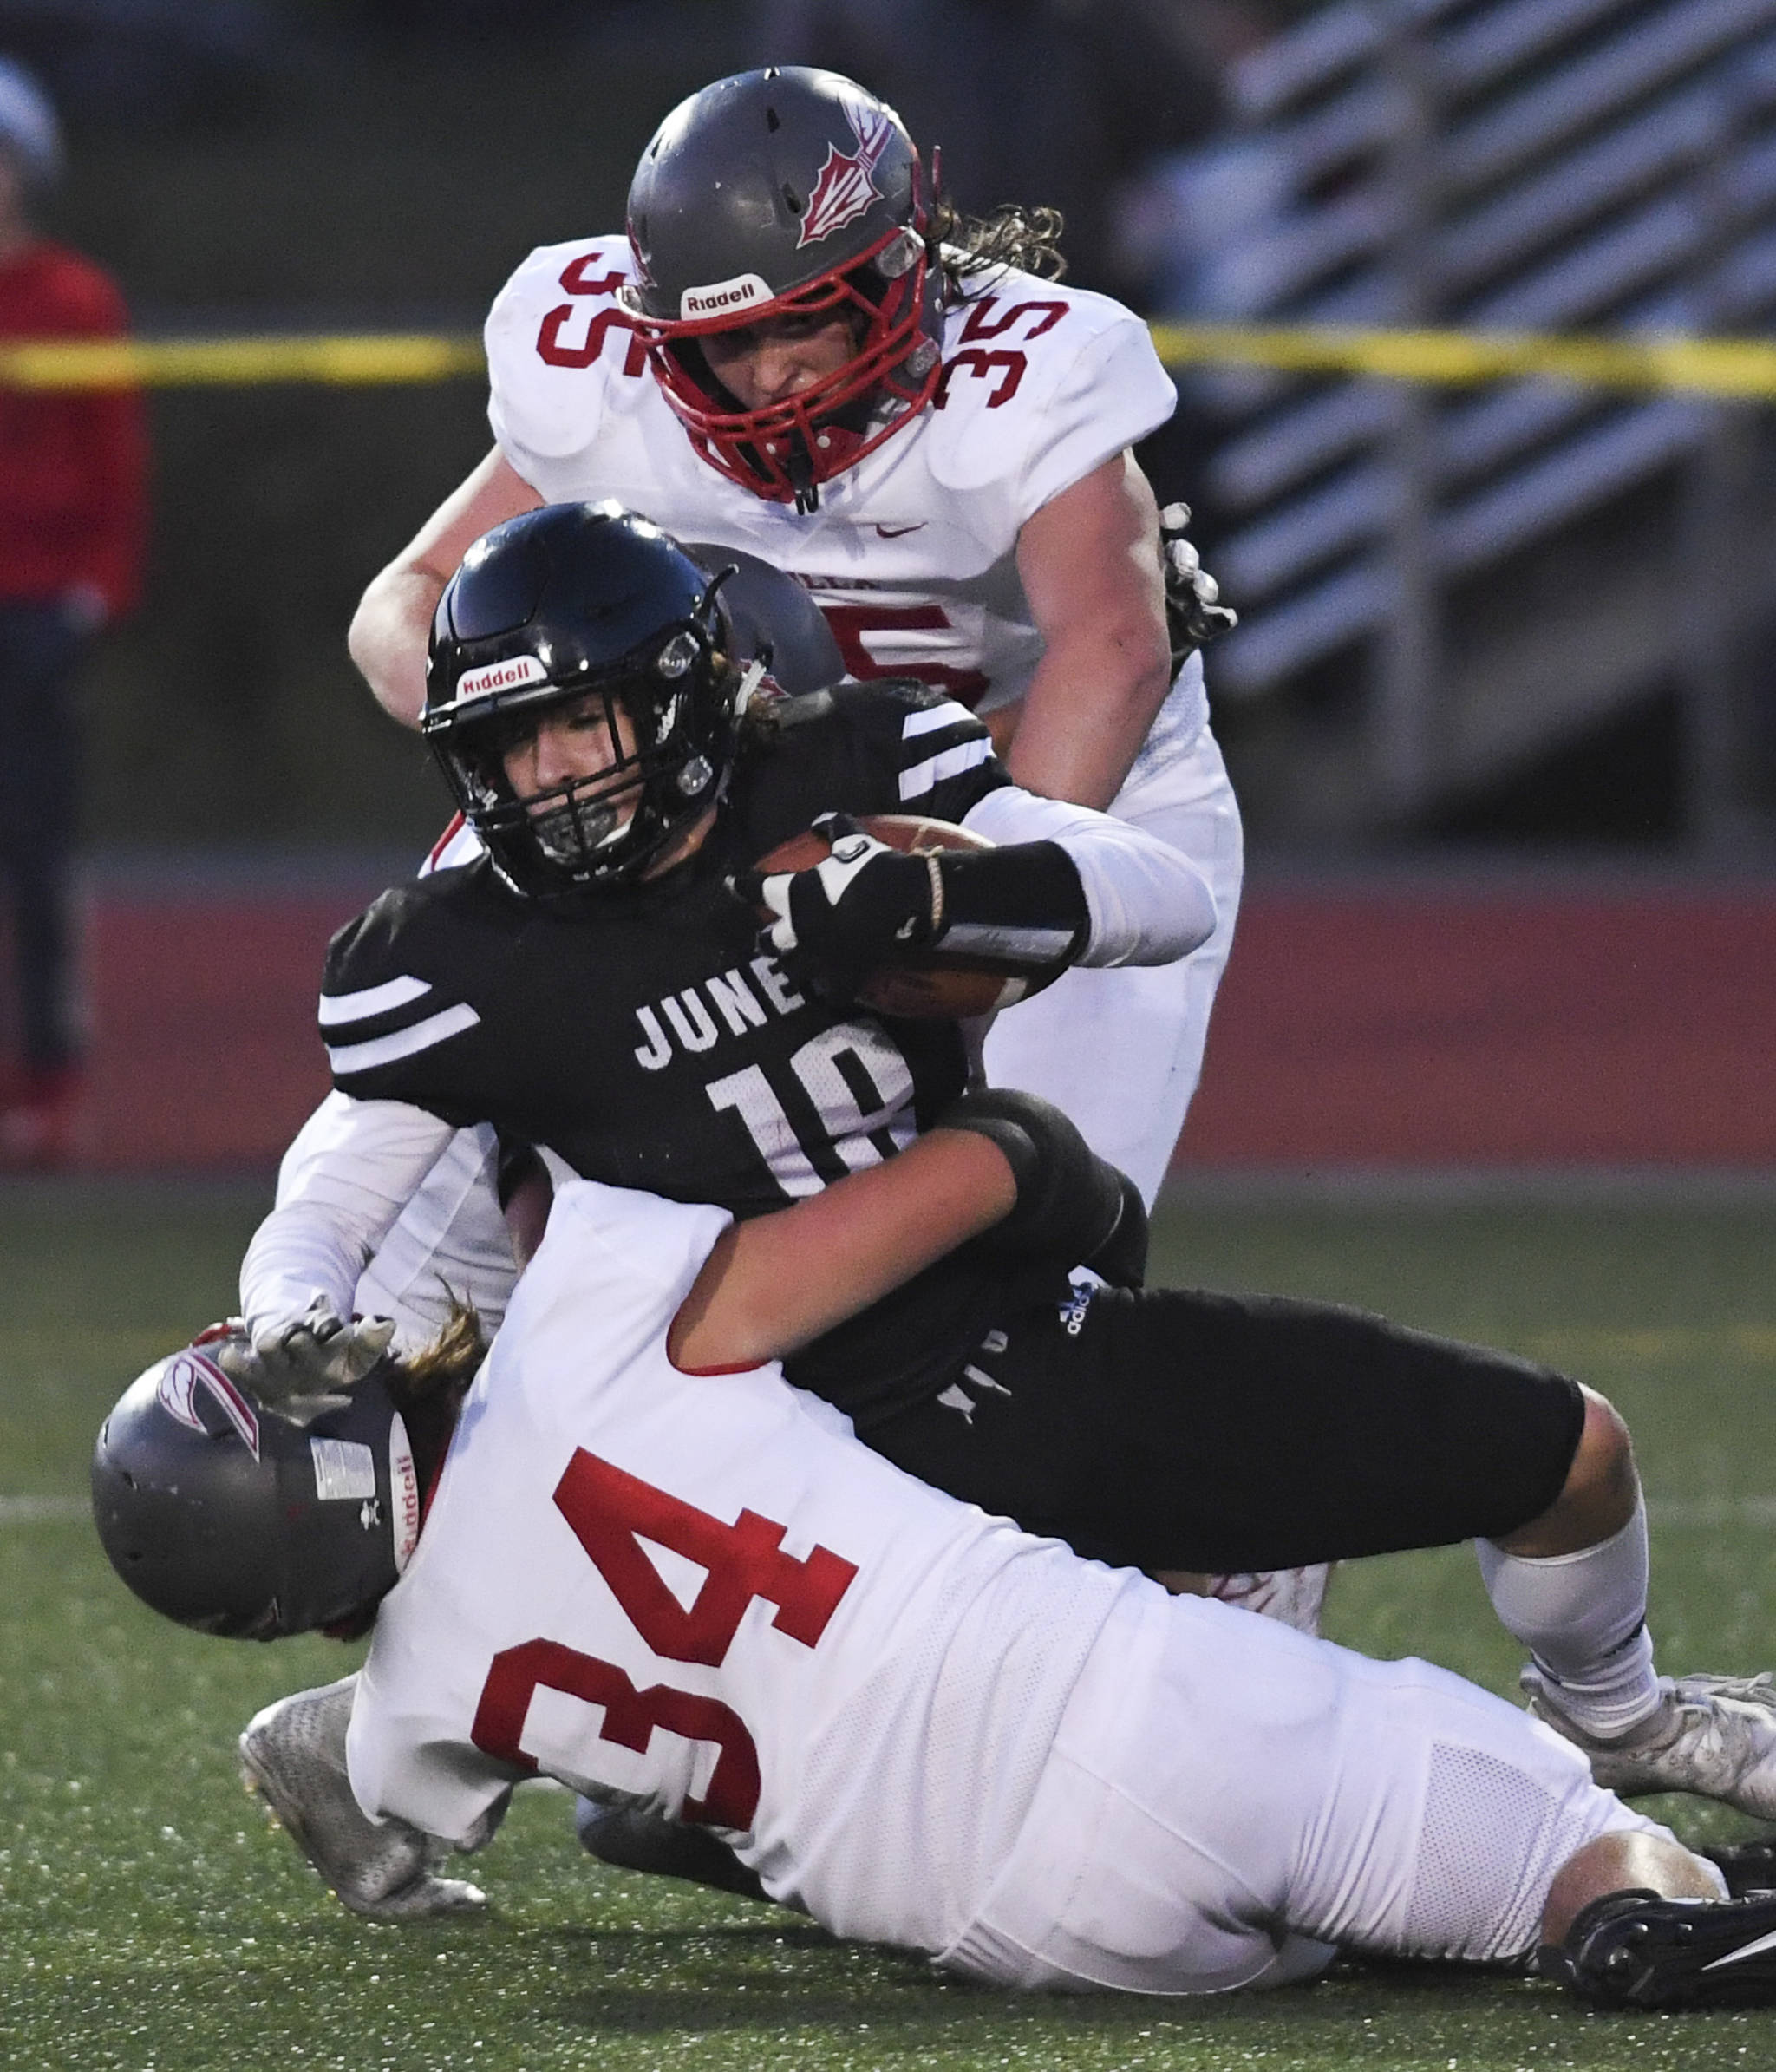 Juneau’s Cooper Kriegmont is brought down by Wasilla’s Sawyer Drumm, bottom, and Tristan Wake in the second quarter at Adair-Kennedy Memorial Field on Friday, Sept. 6, 2019. Juneau won 63-0. (Michael Penn | Juneau Empire)